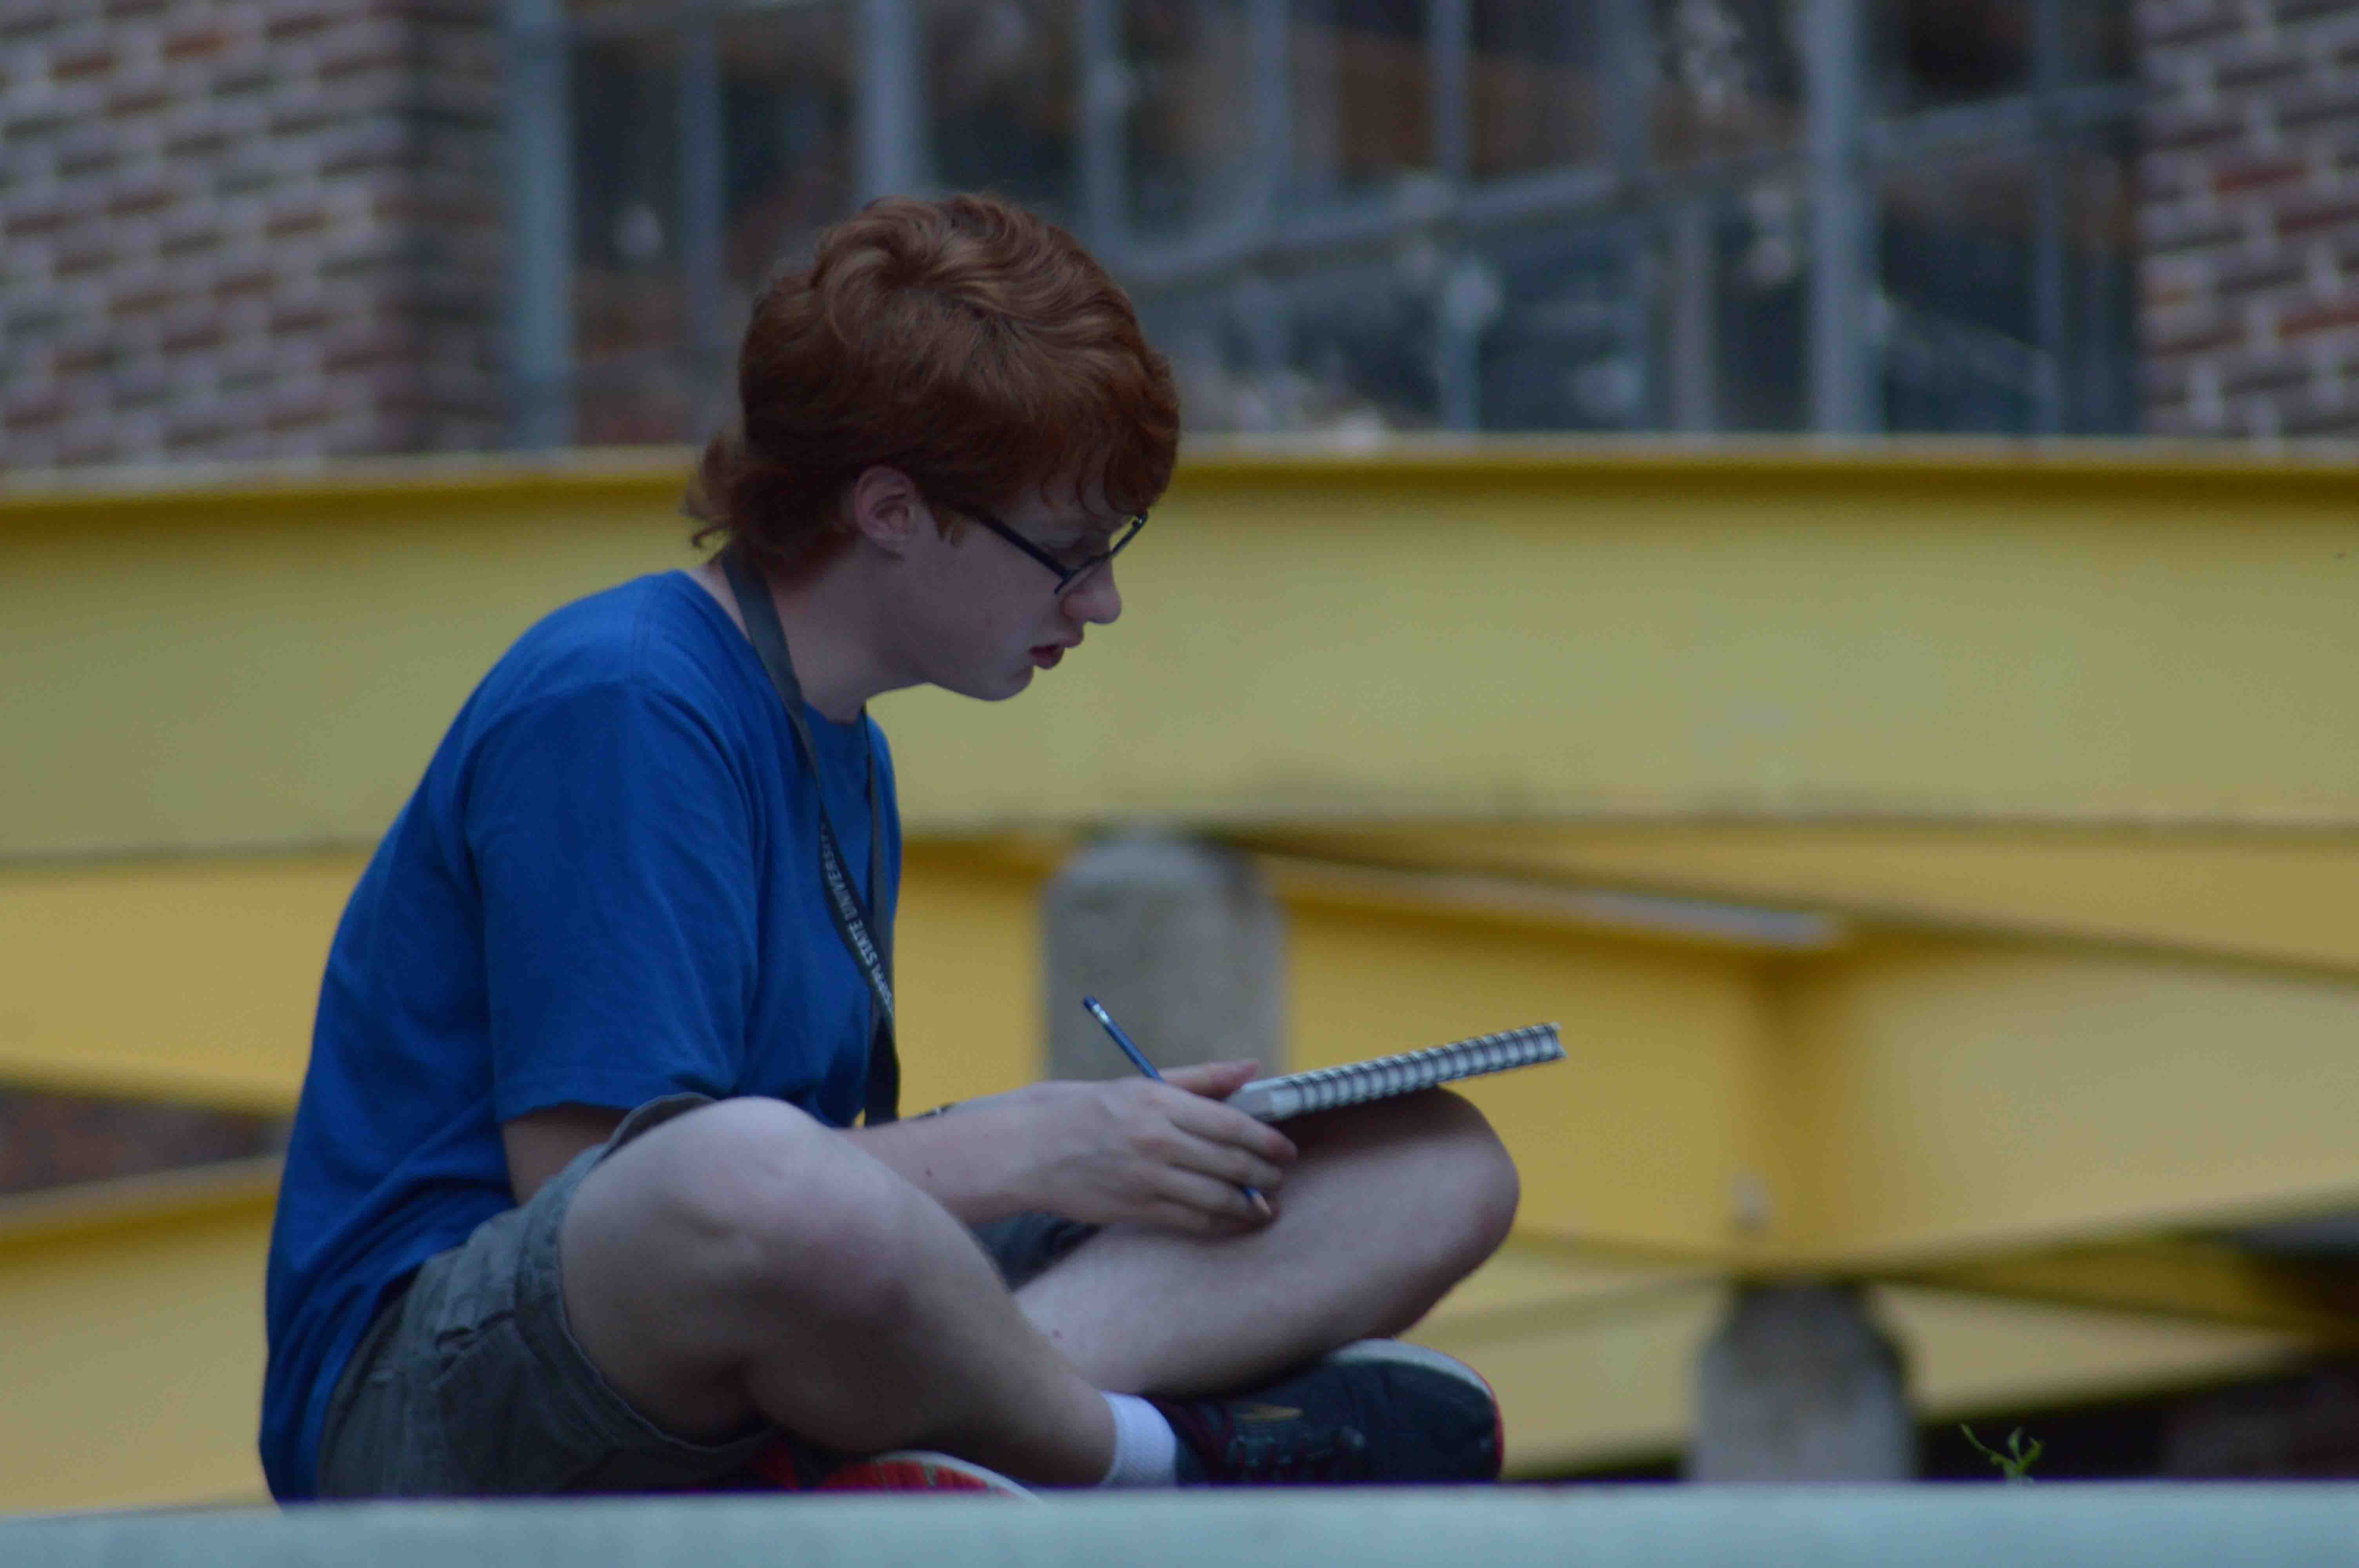 Student sitting and sketching in blue shirt